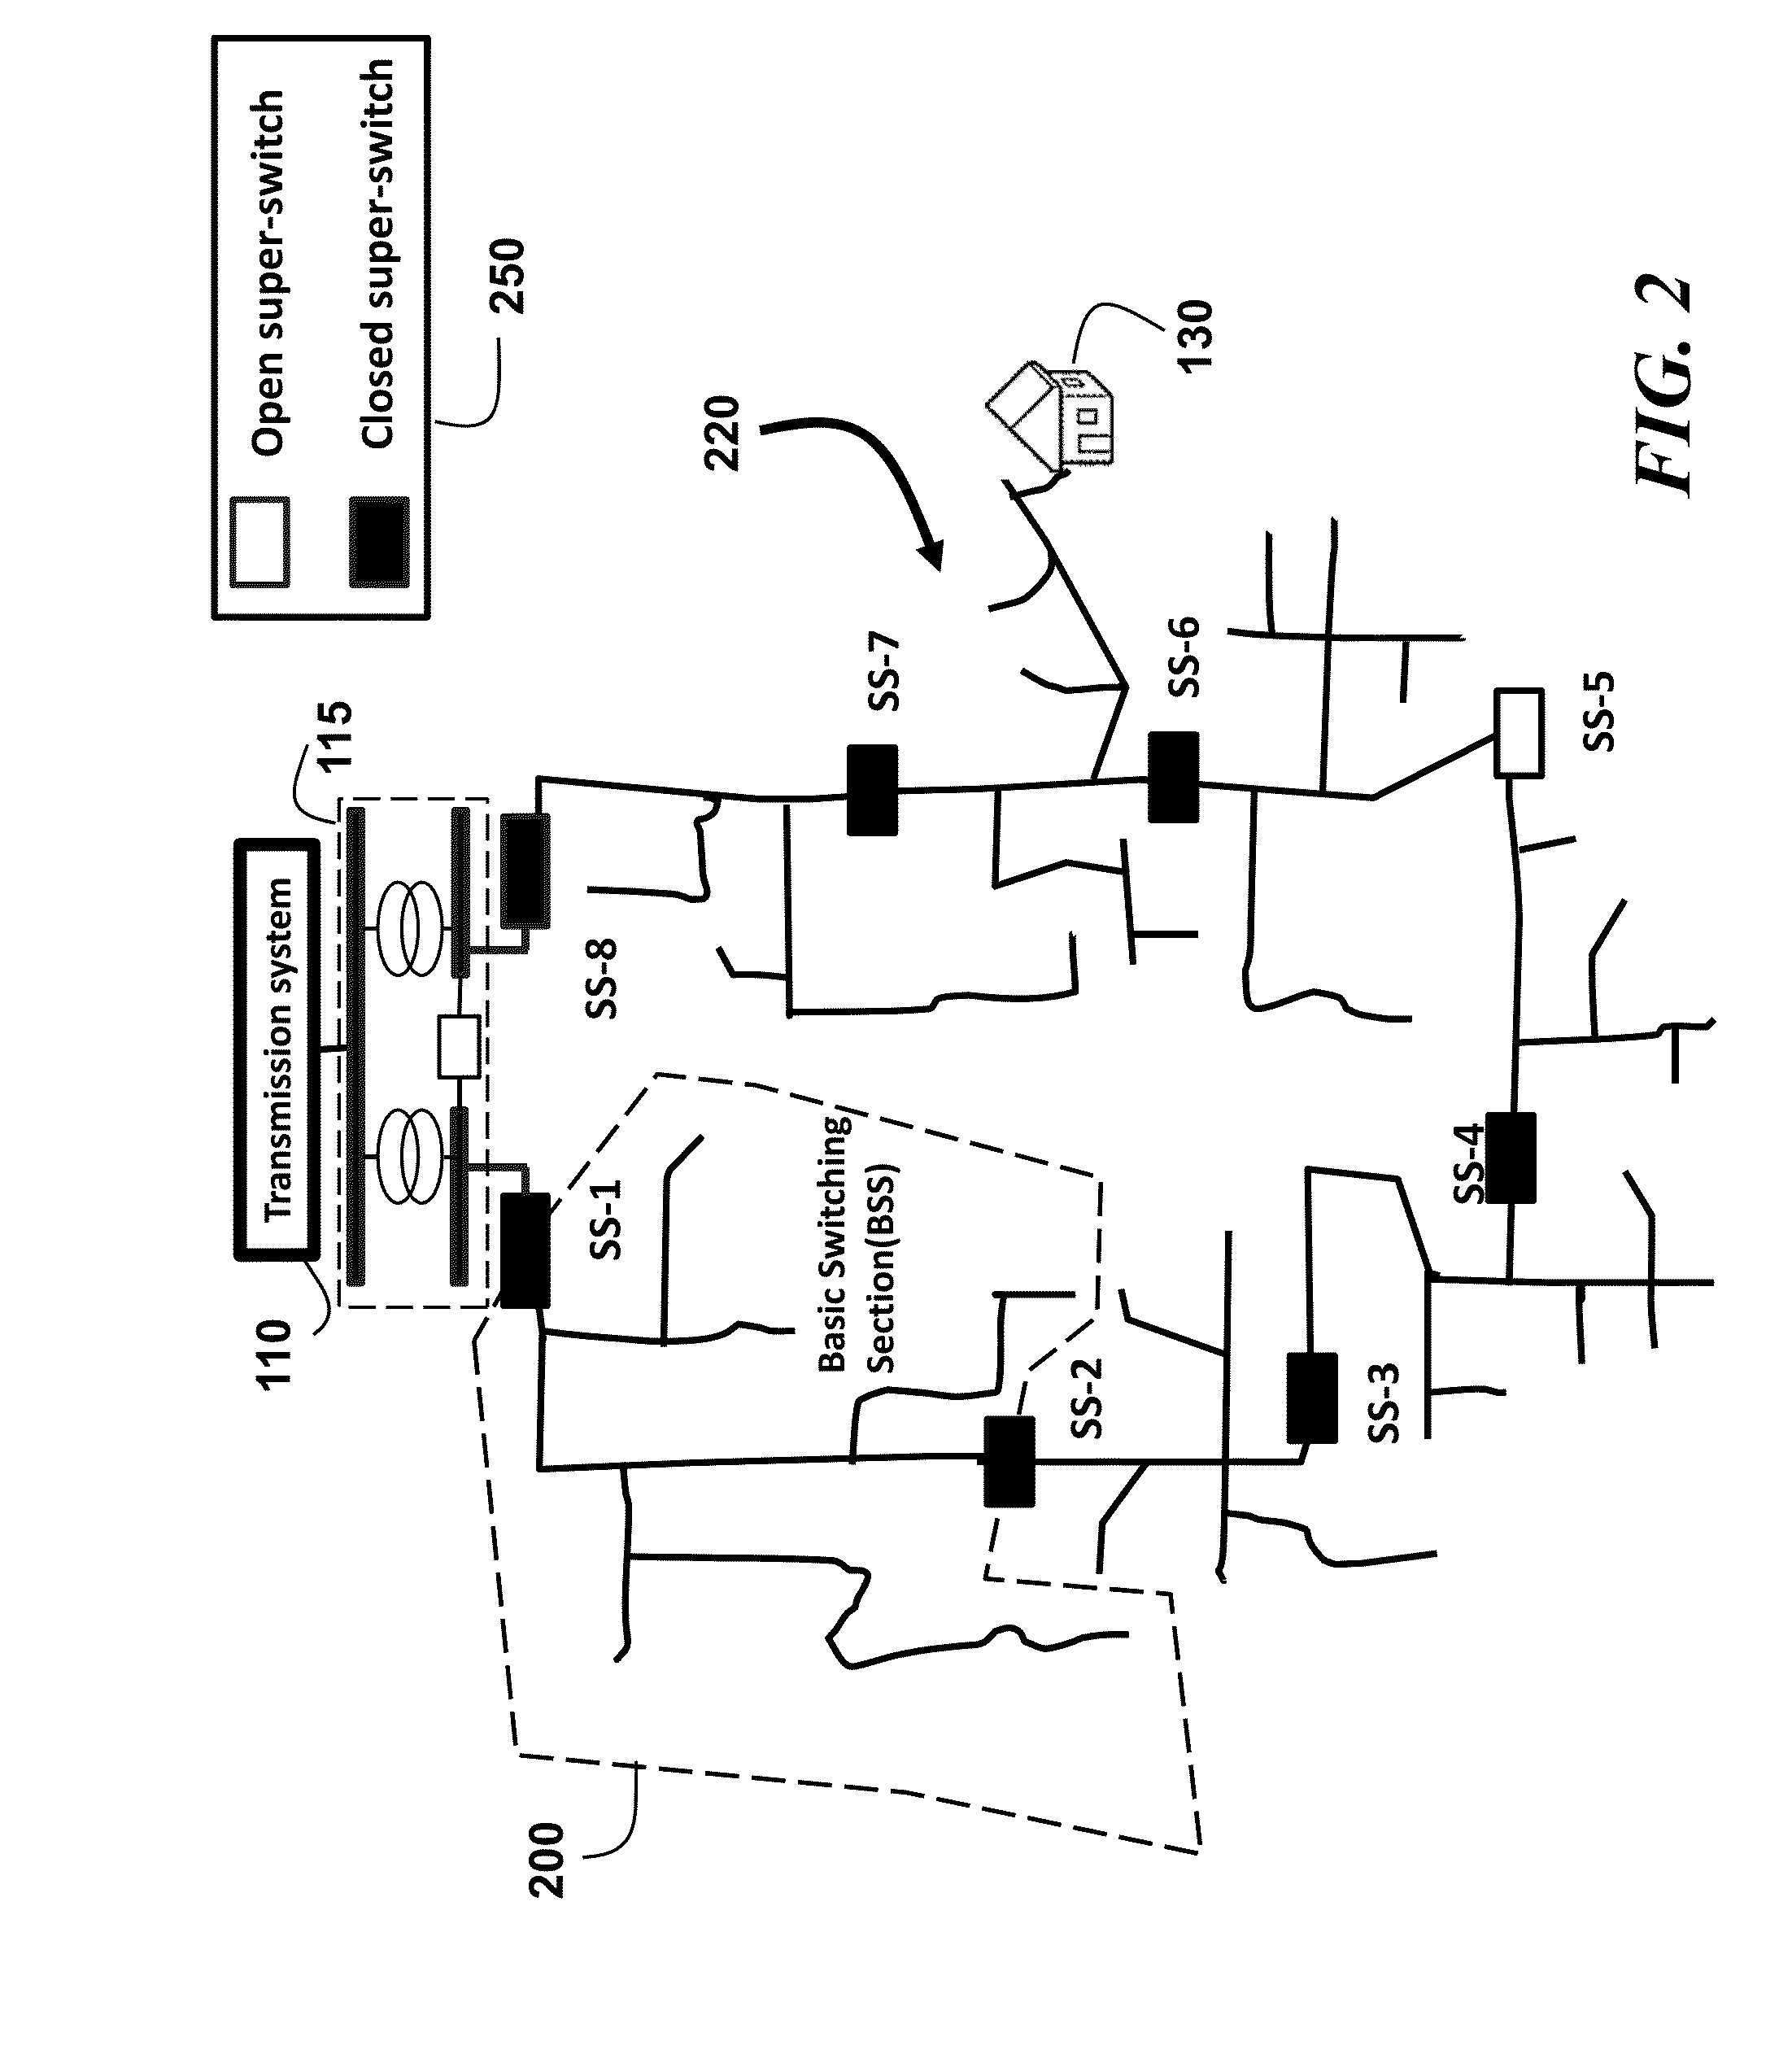 Dynamic and Adaptive Configurable Power Distribution System